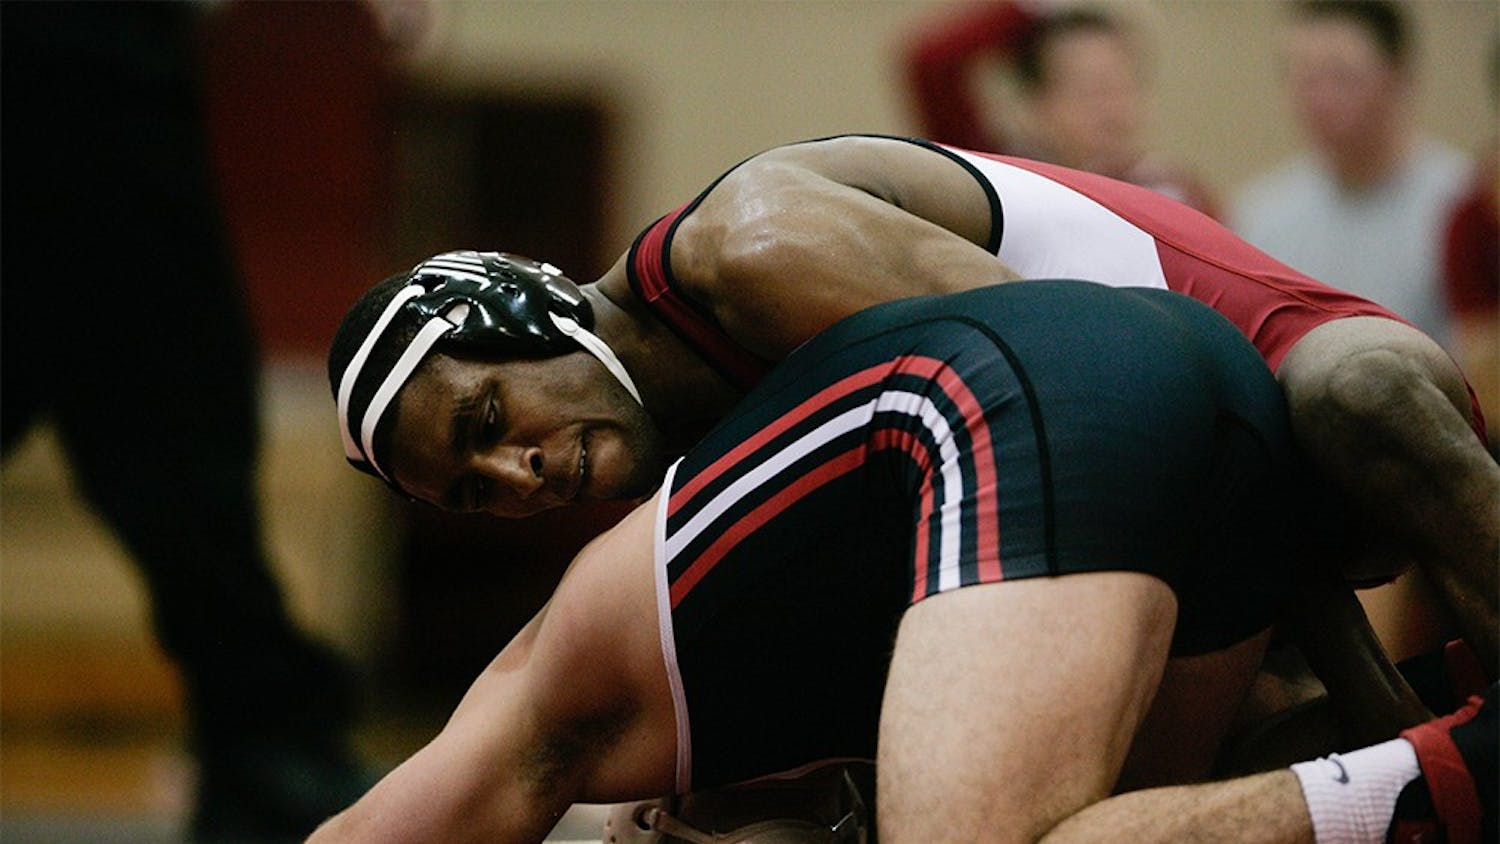 Junior Nate Jackson holds down Clayton Bass of SIU during the 174 lbs match on Dec. 5. Jackson won the match 16-1, scoring 10 points in just the first period helping the Hoosiers secure a 25-12 victory over the Eagles. 